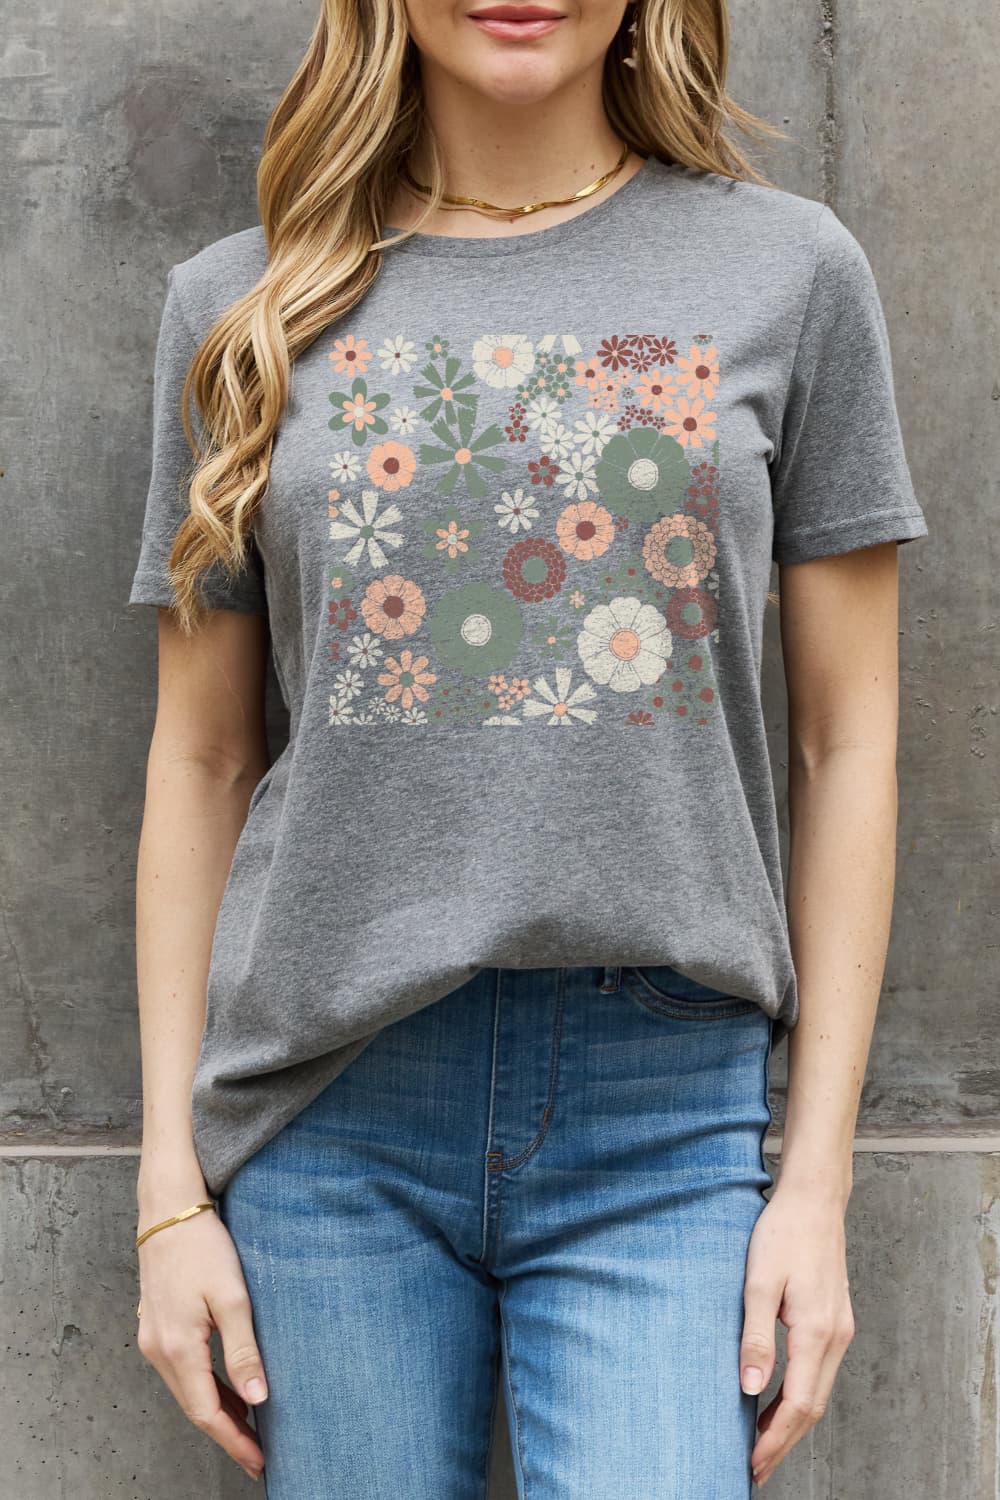 Slate Gray Simply Love Flower Graphic Cotton Tee